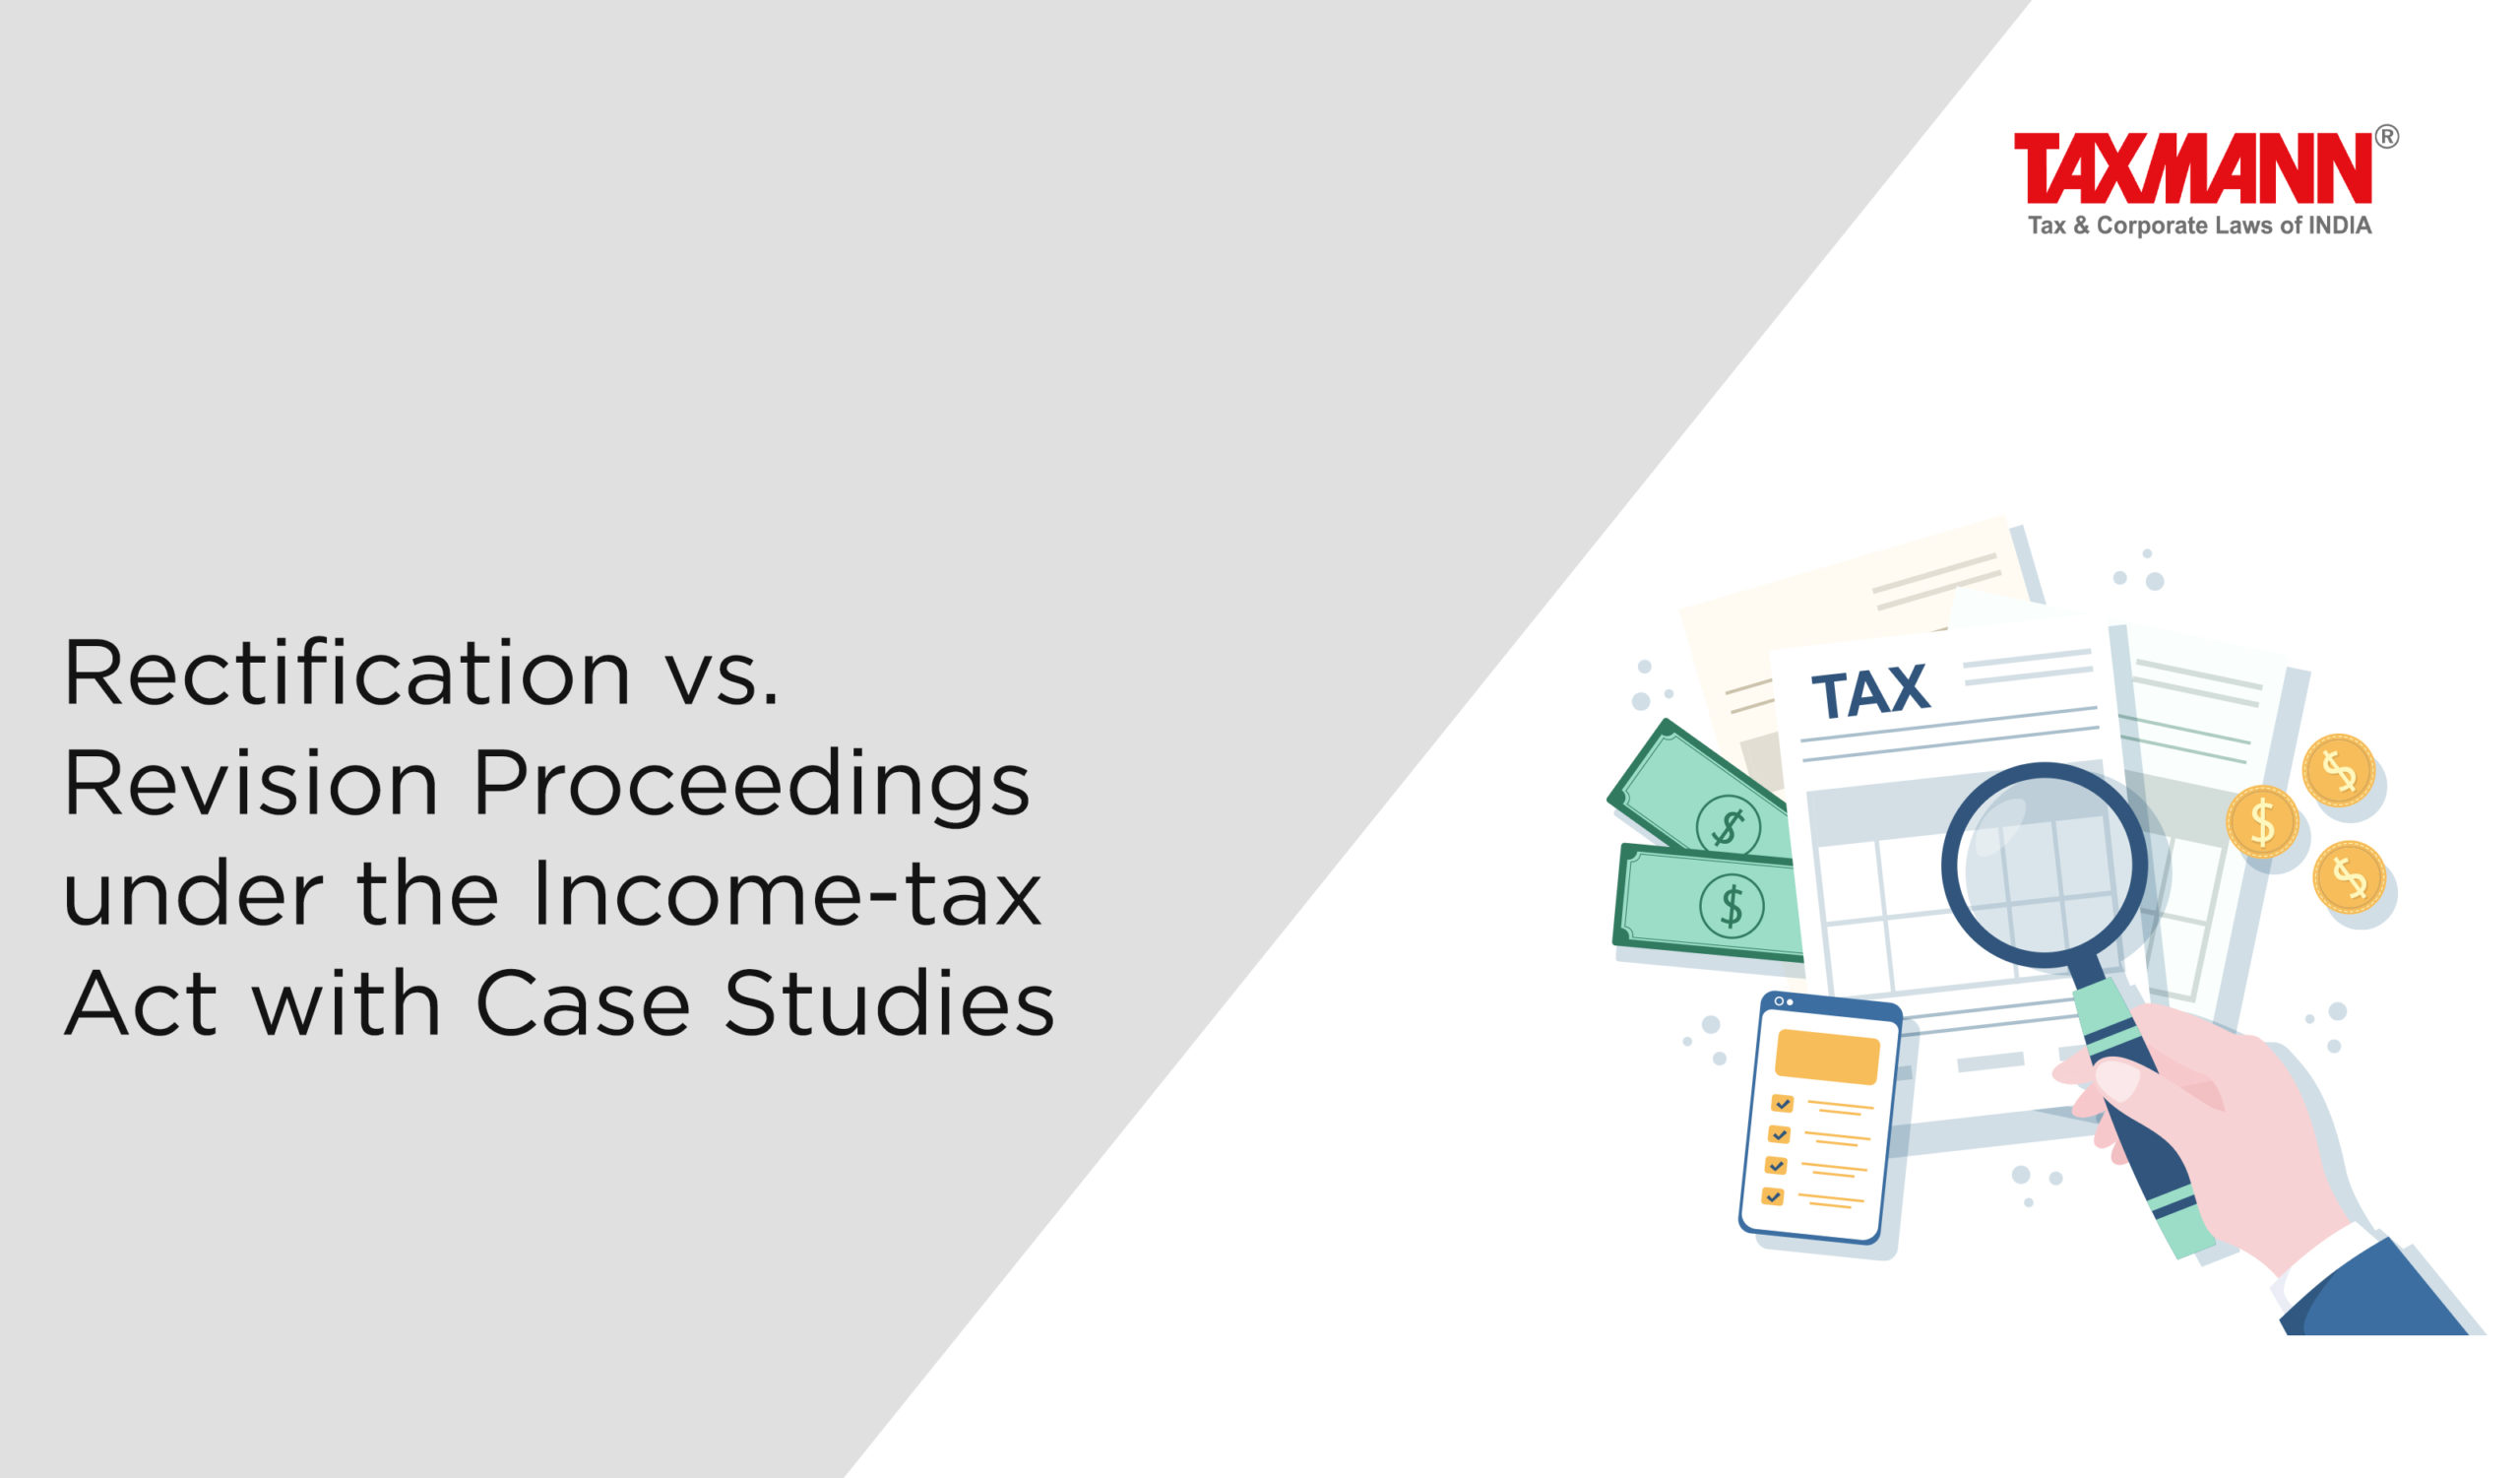 Rectification and Revision Proceedings under Income Tax Act